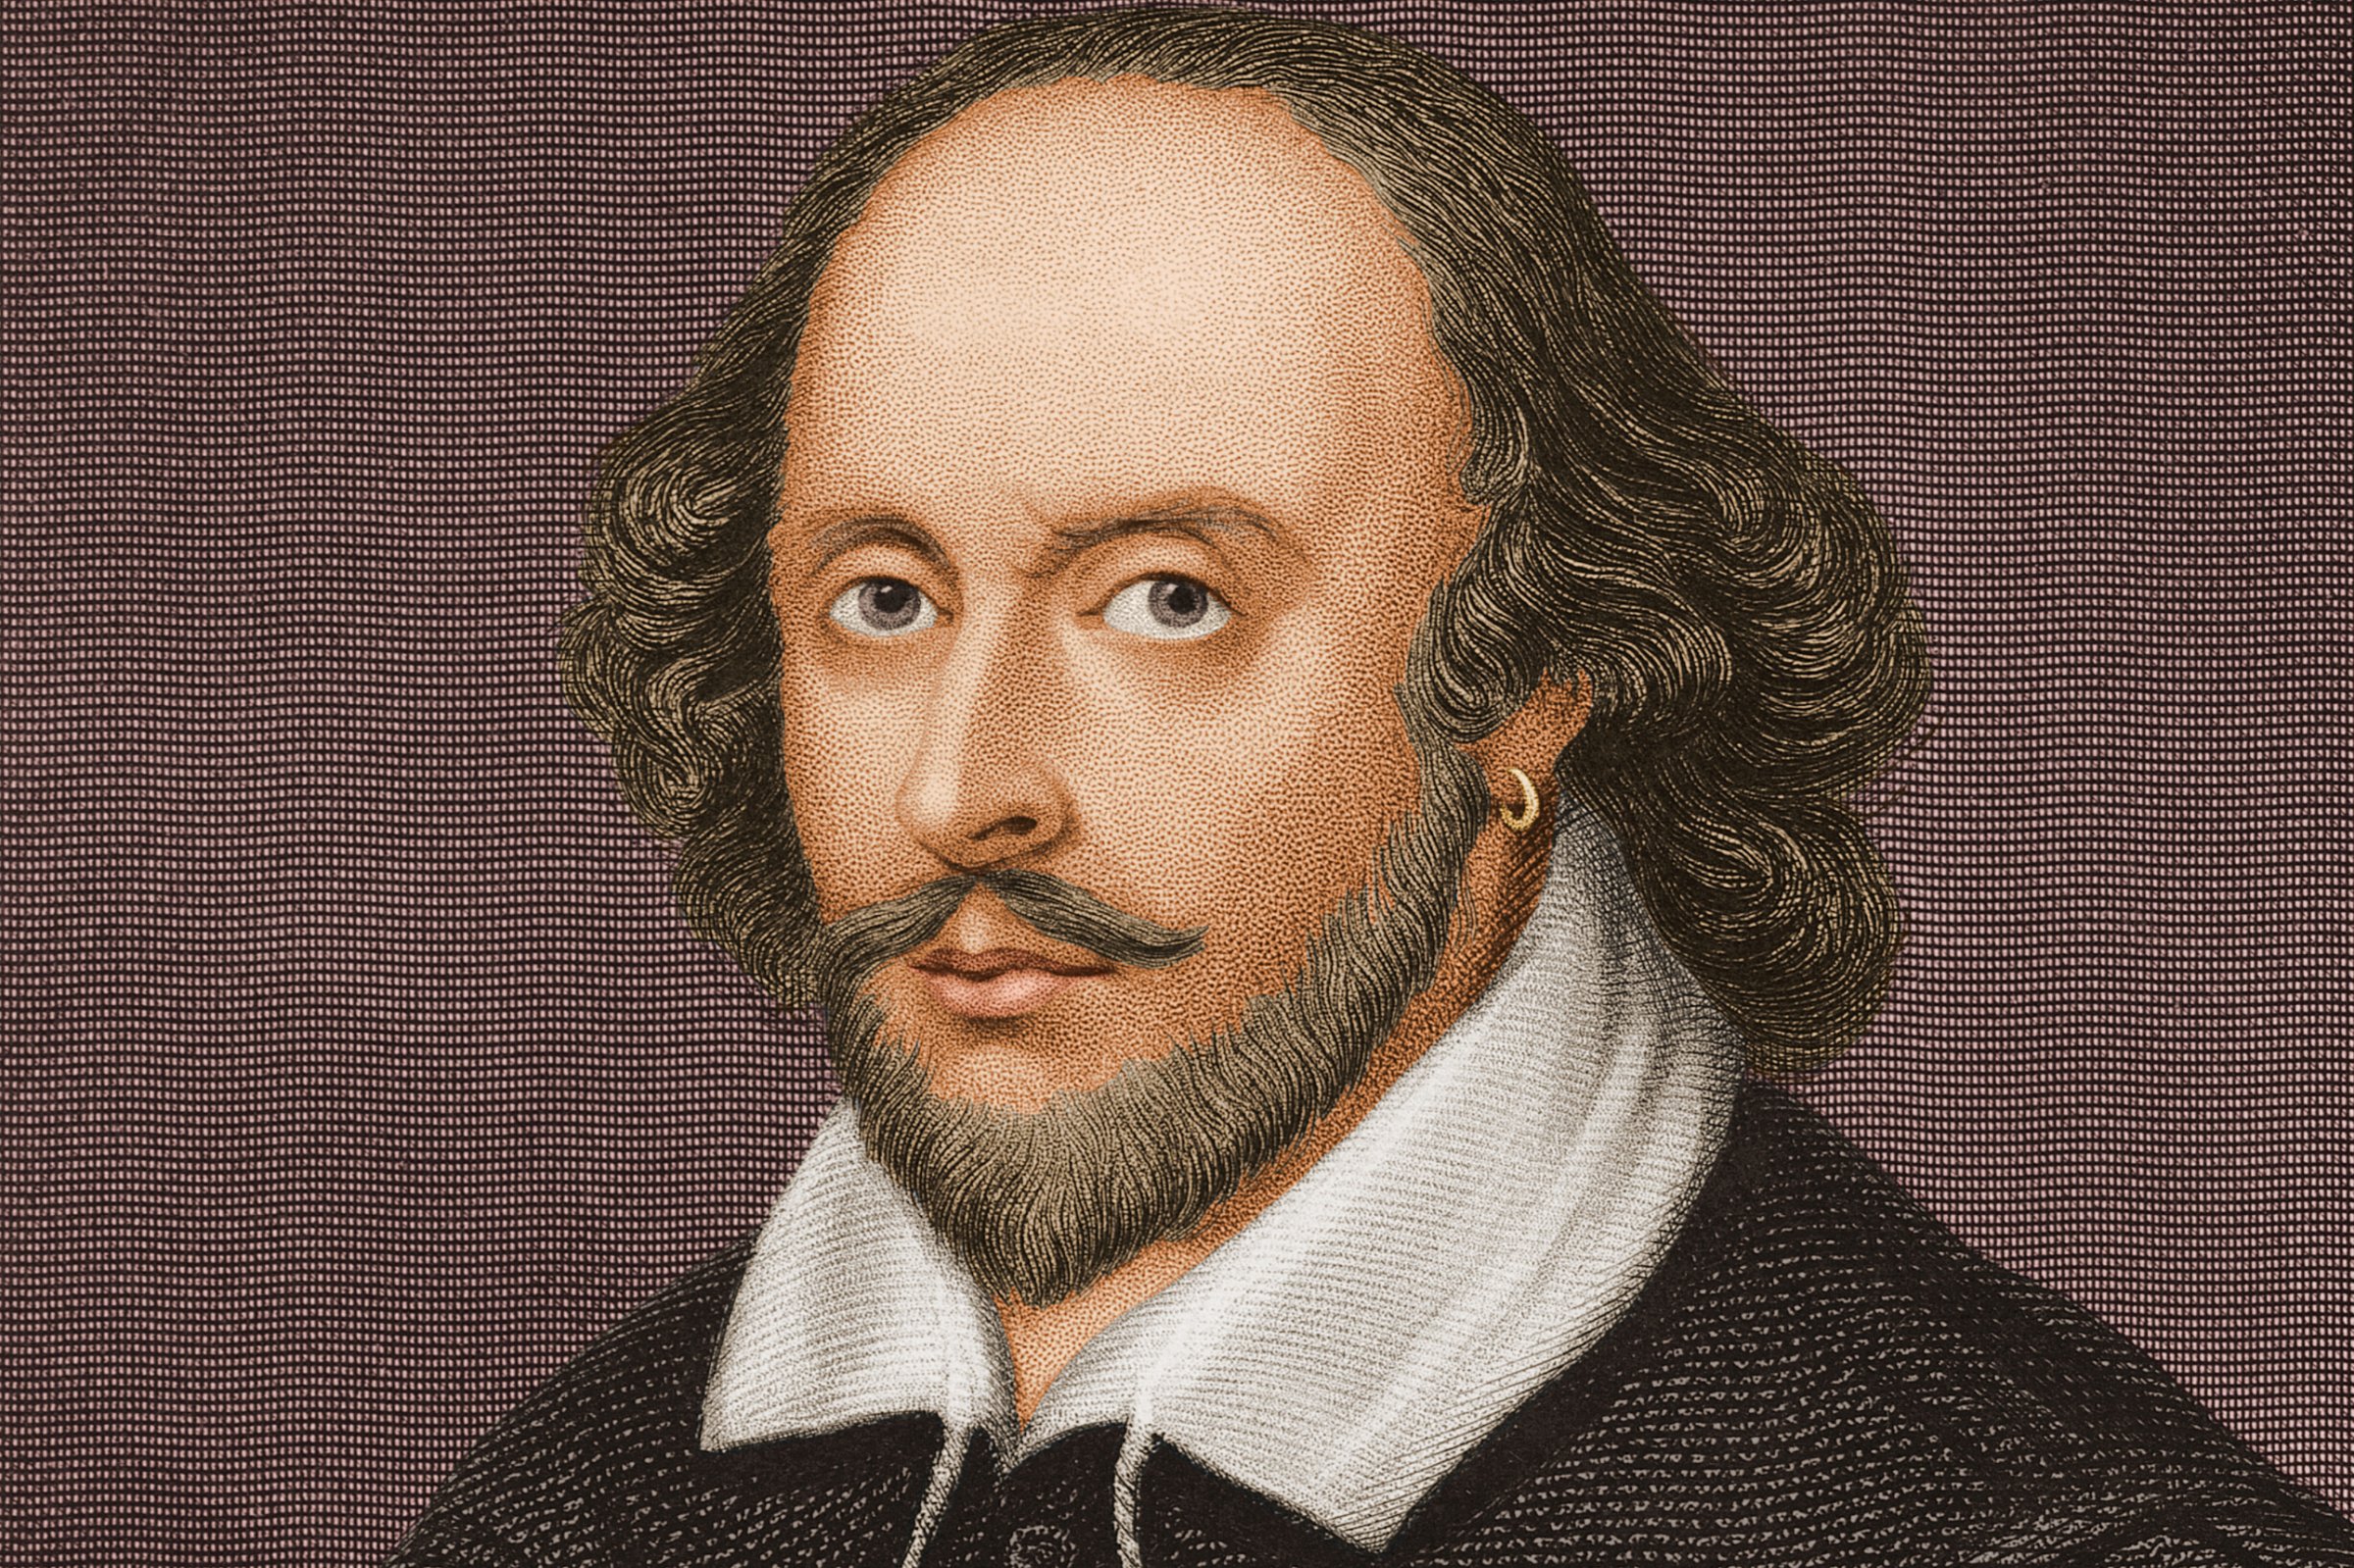 English playwright and poet William Shakespeare.